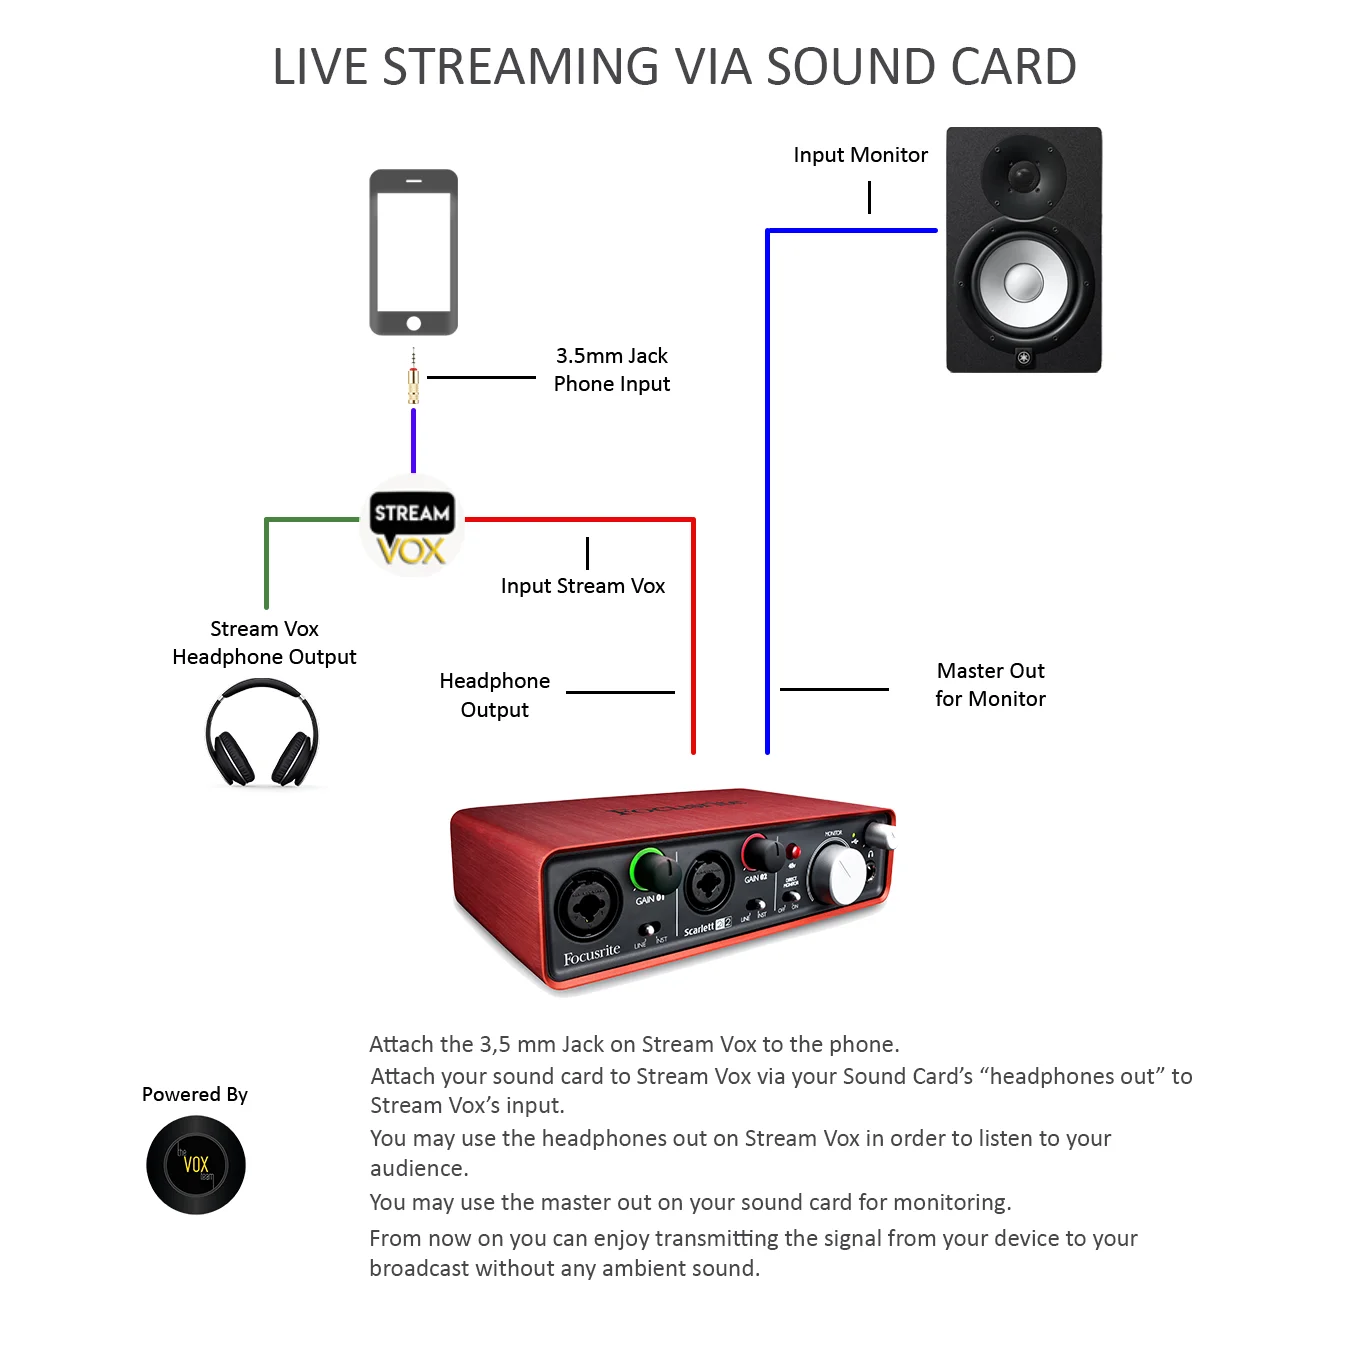 Streamvox Portable Audio Interface For Live Streaming Instagram Recording on All Phones & Tablet from Mixer Setup Sound Card SV2 enlarge